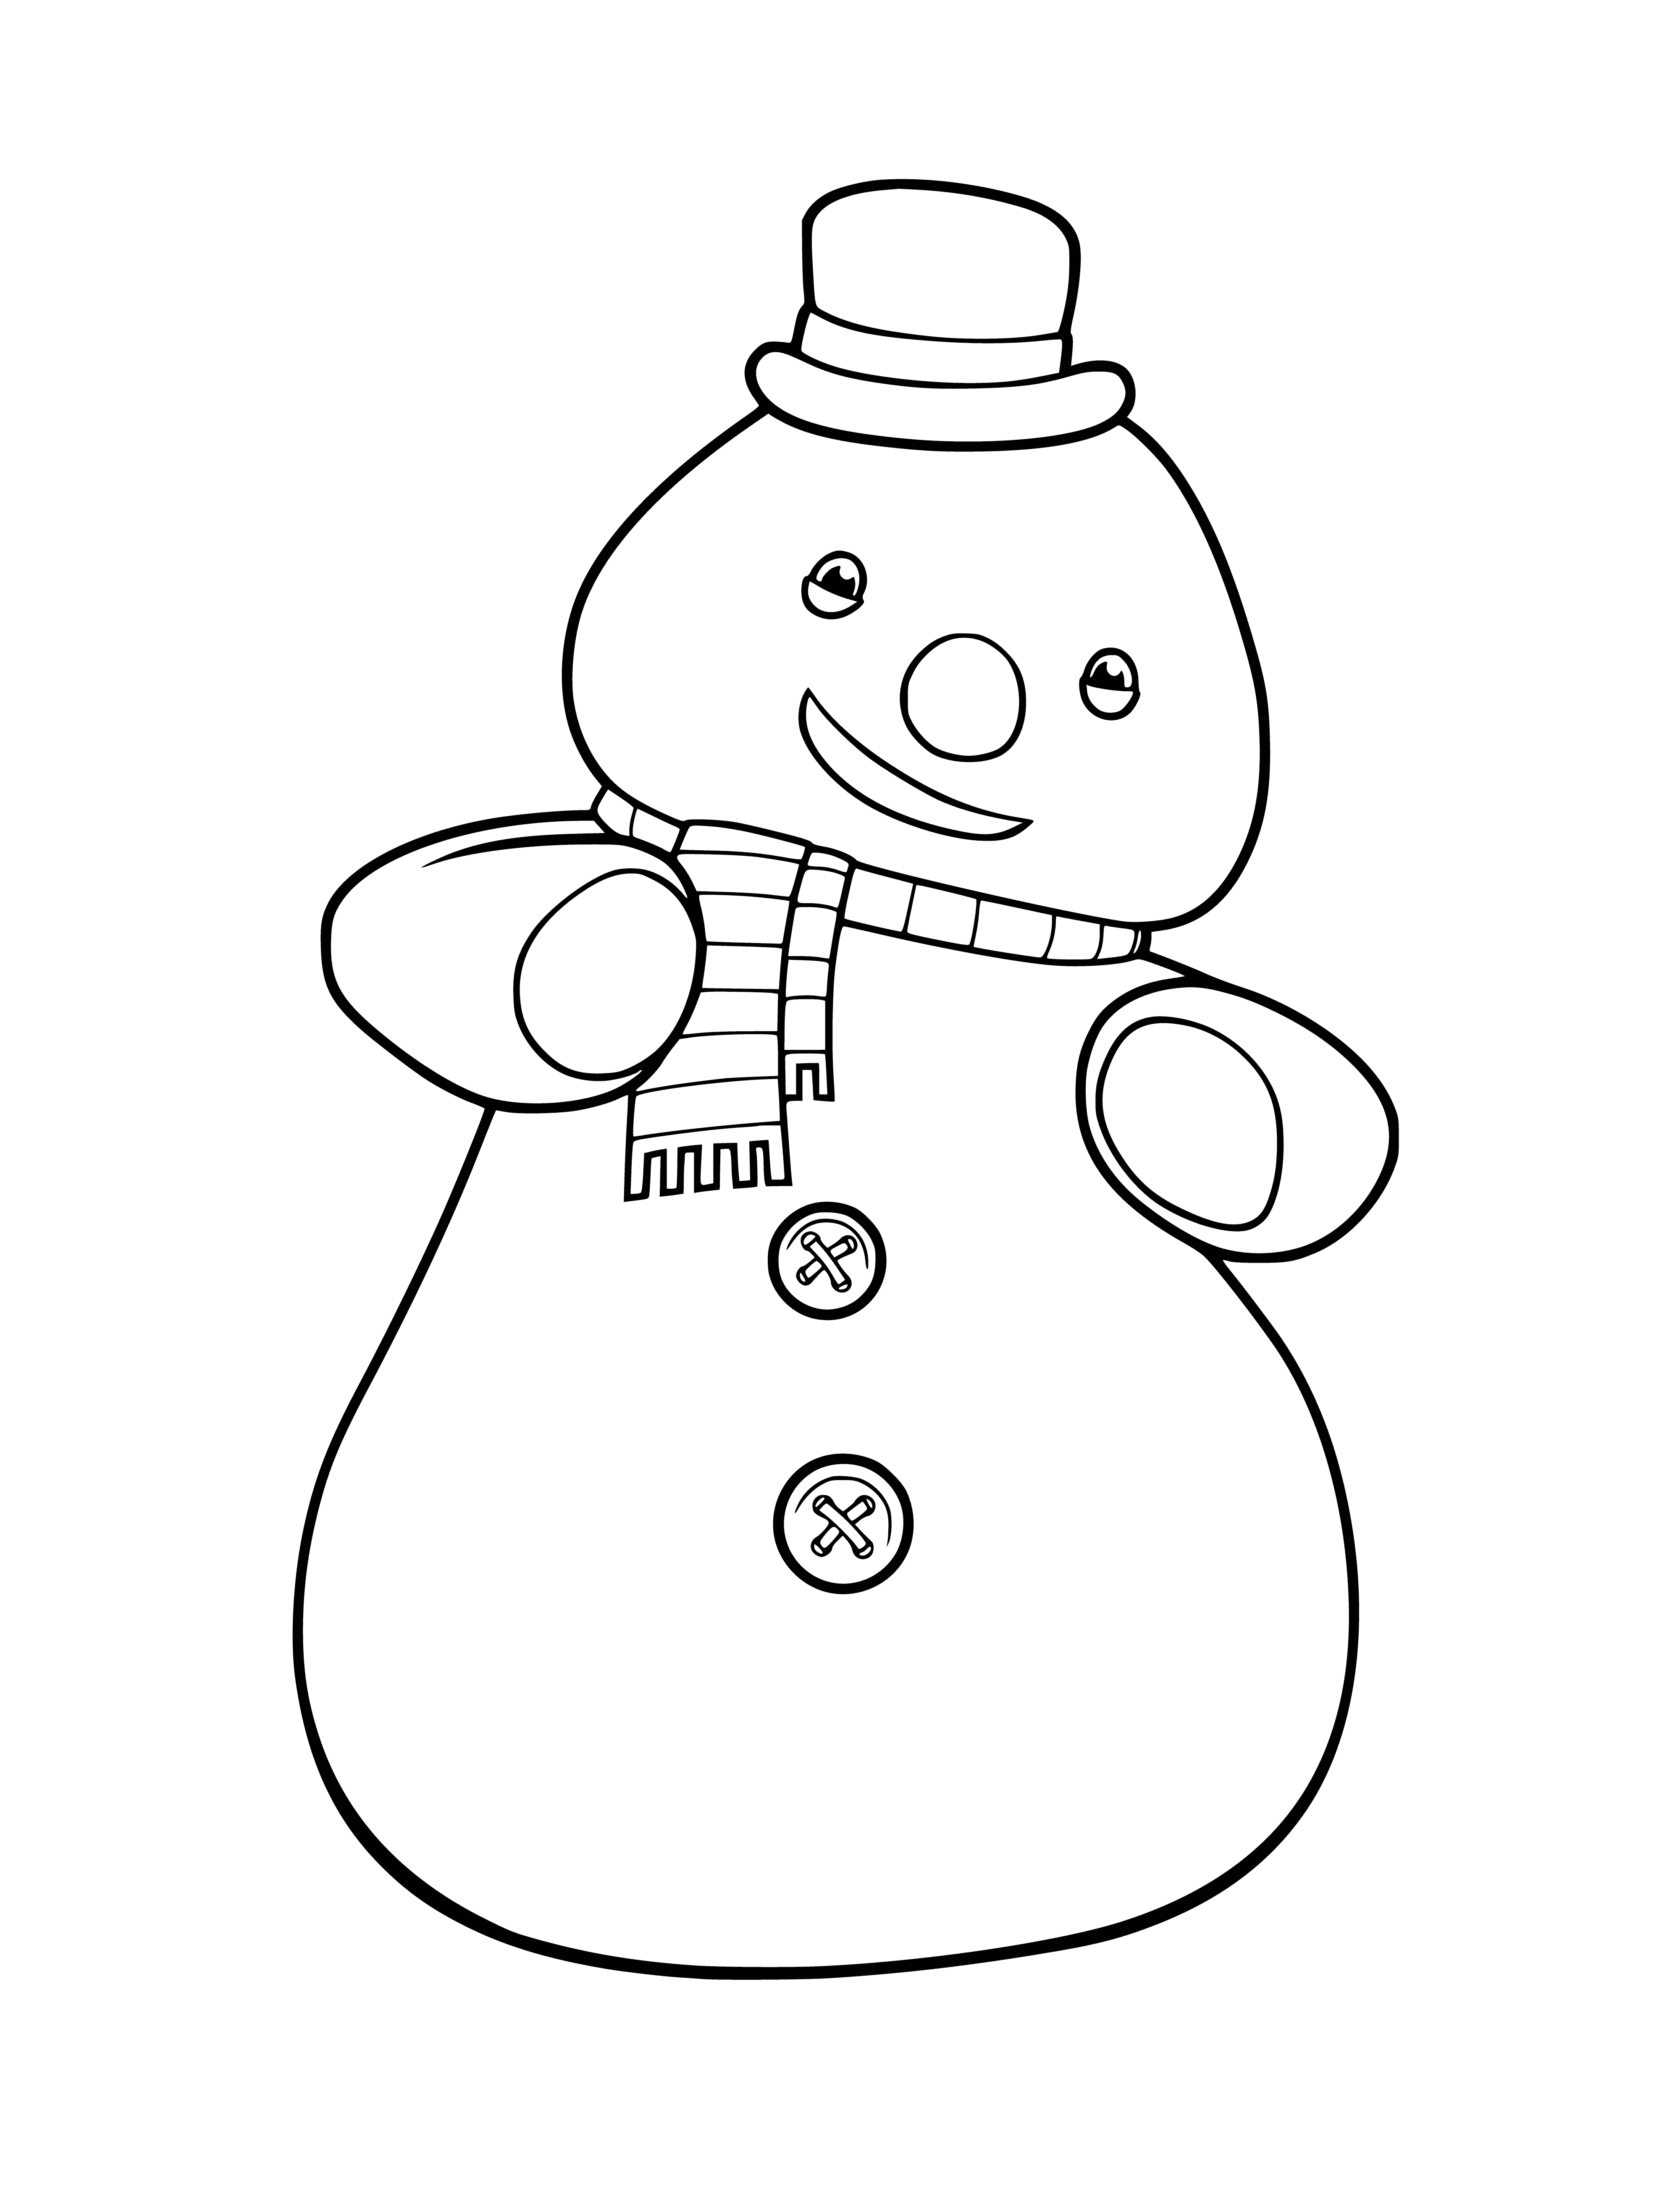 Snowman Chilly coloring page